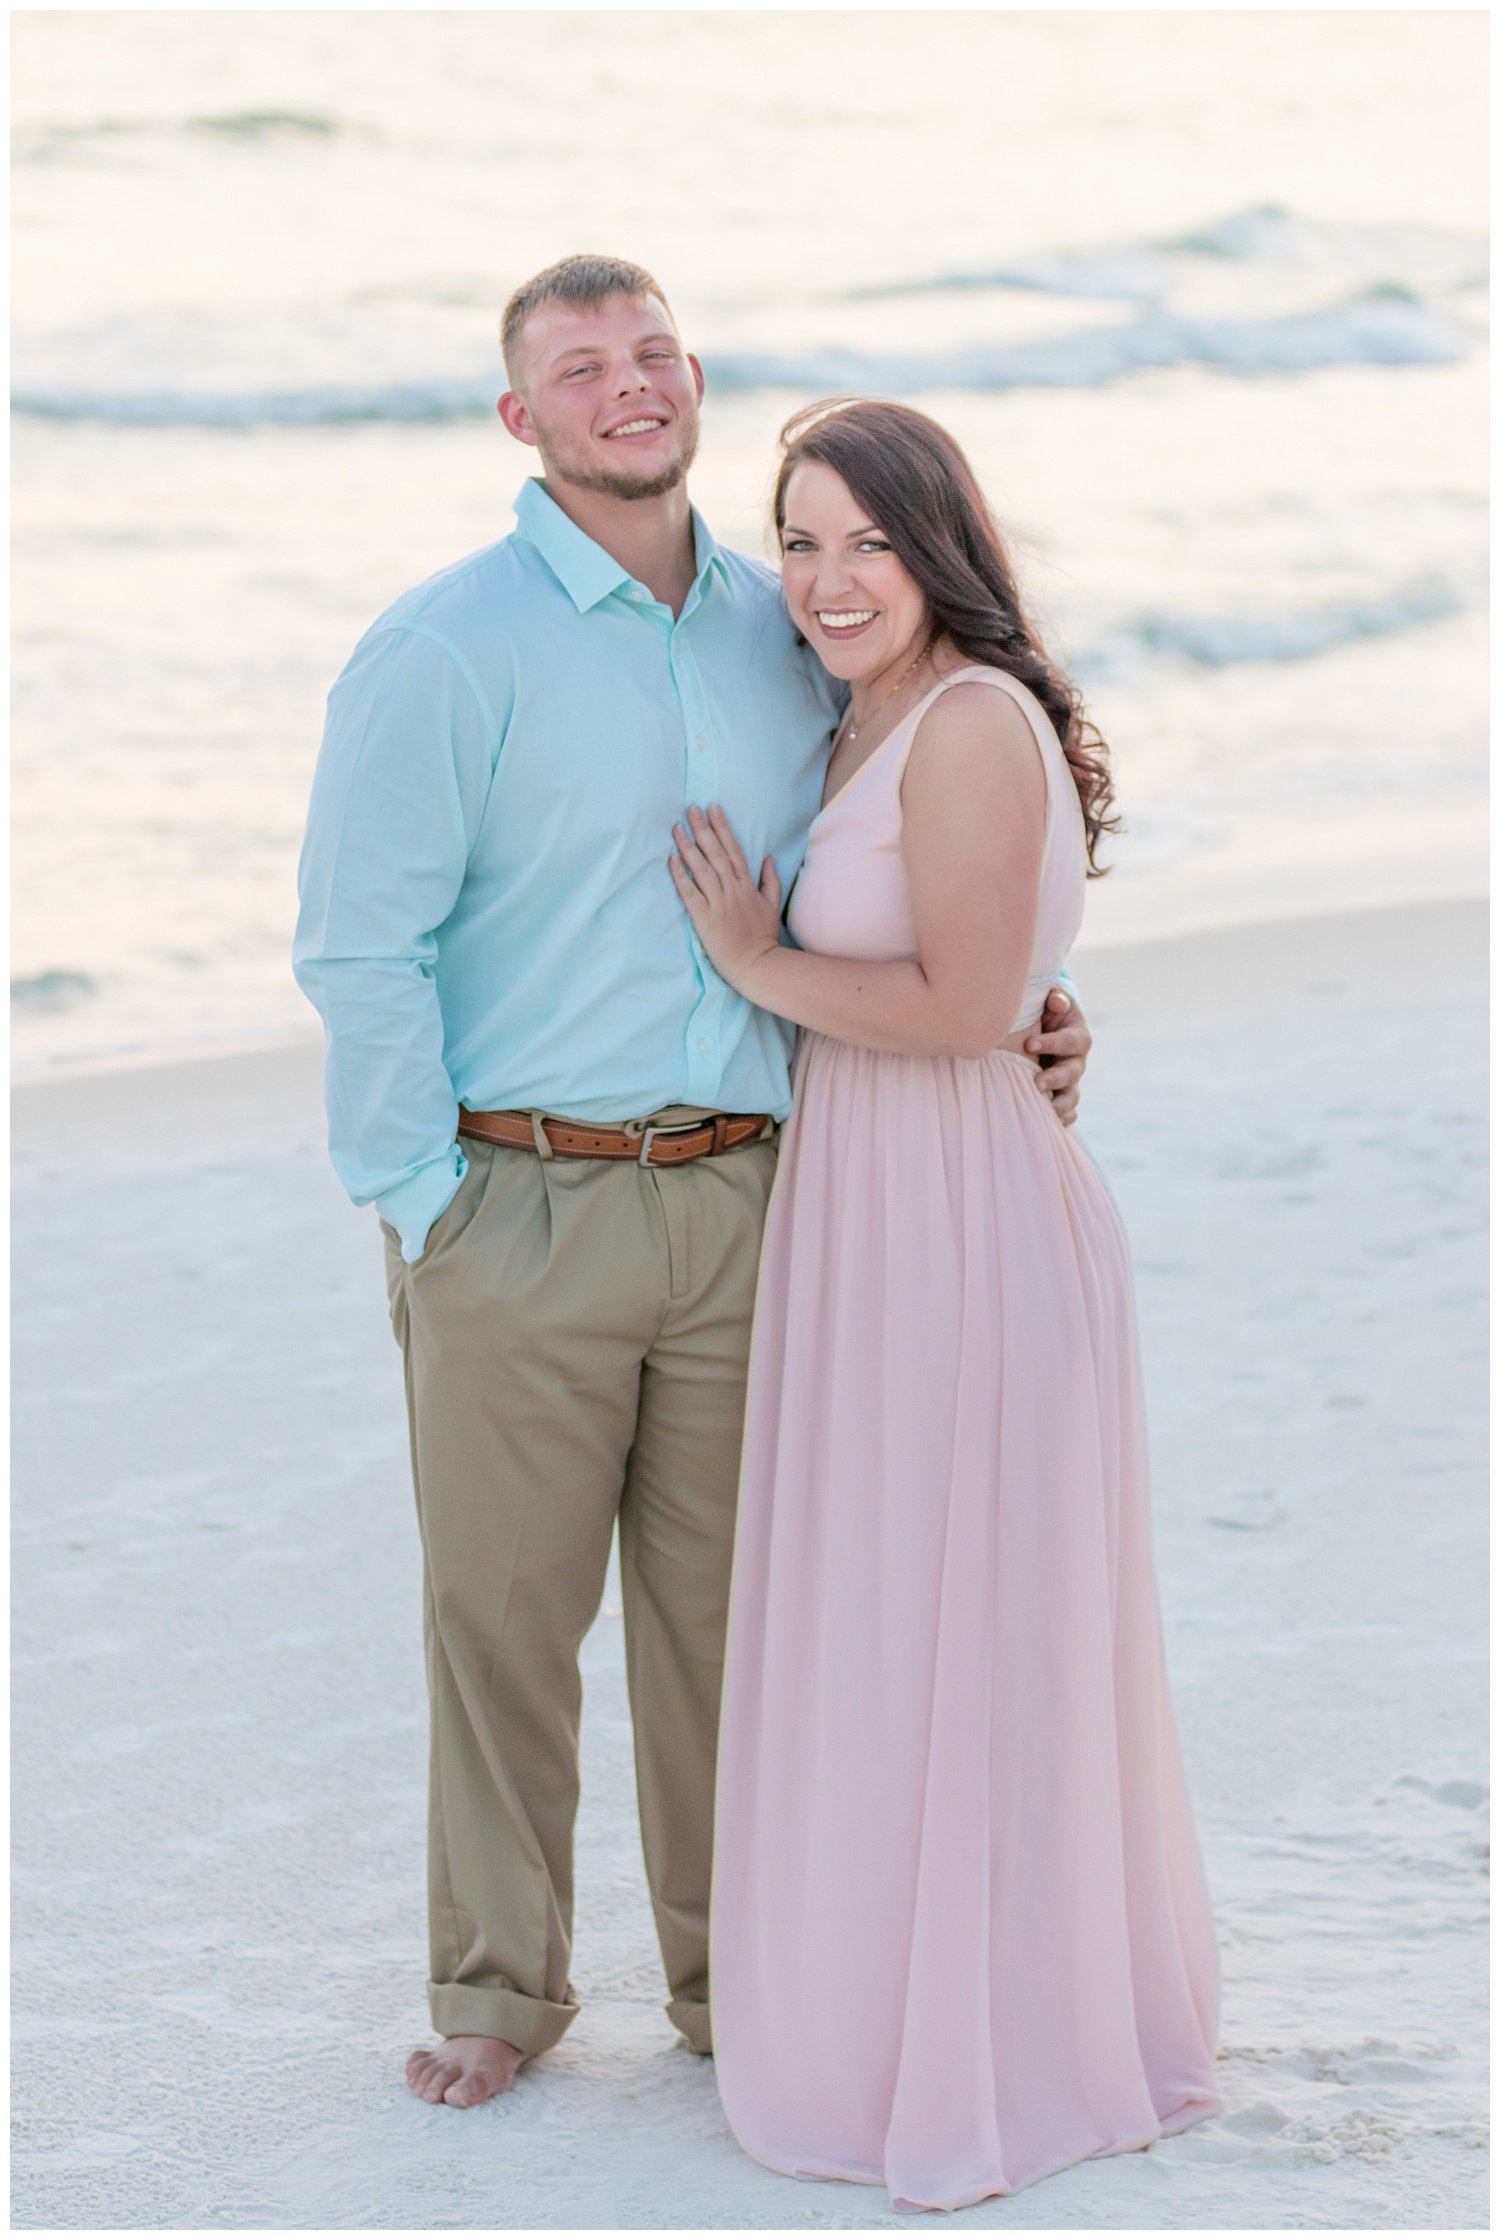 Panama city beach proposal session during couples session